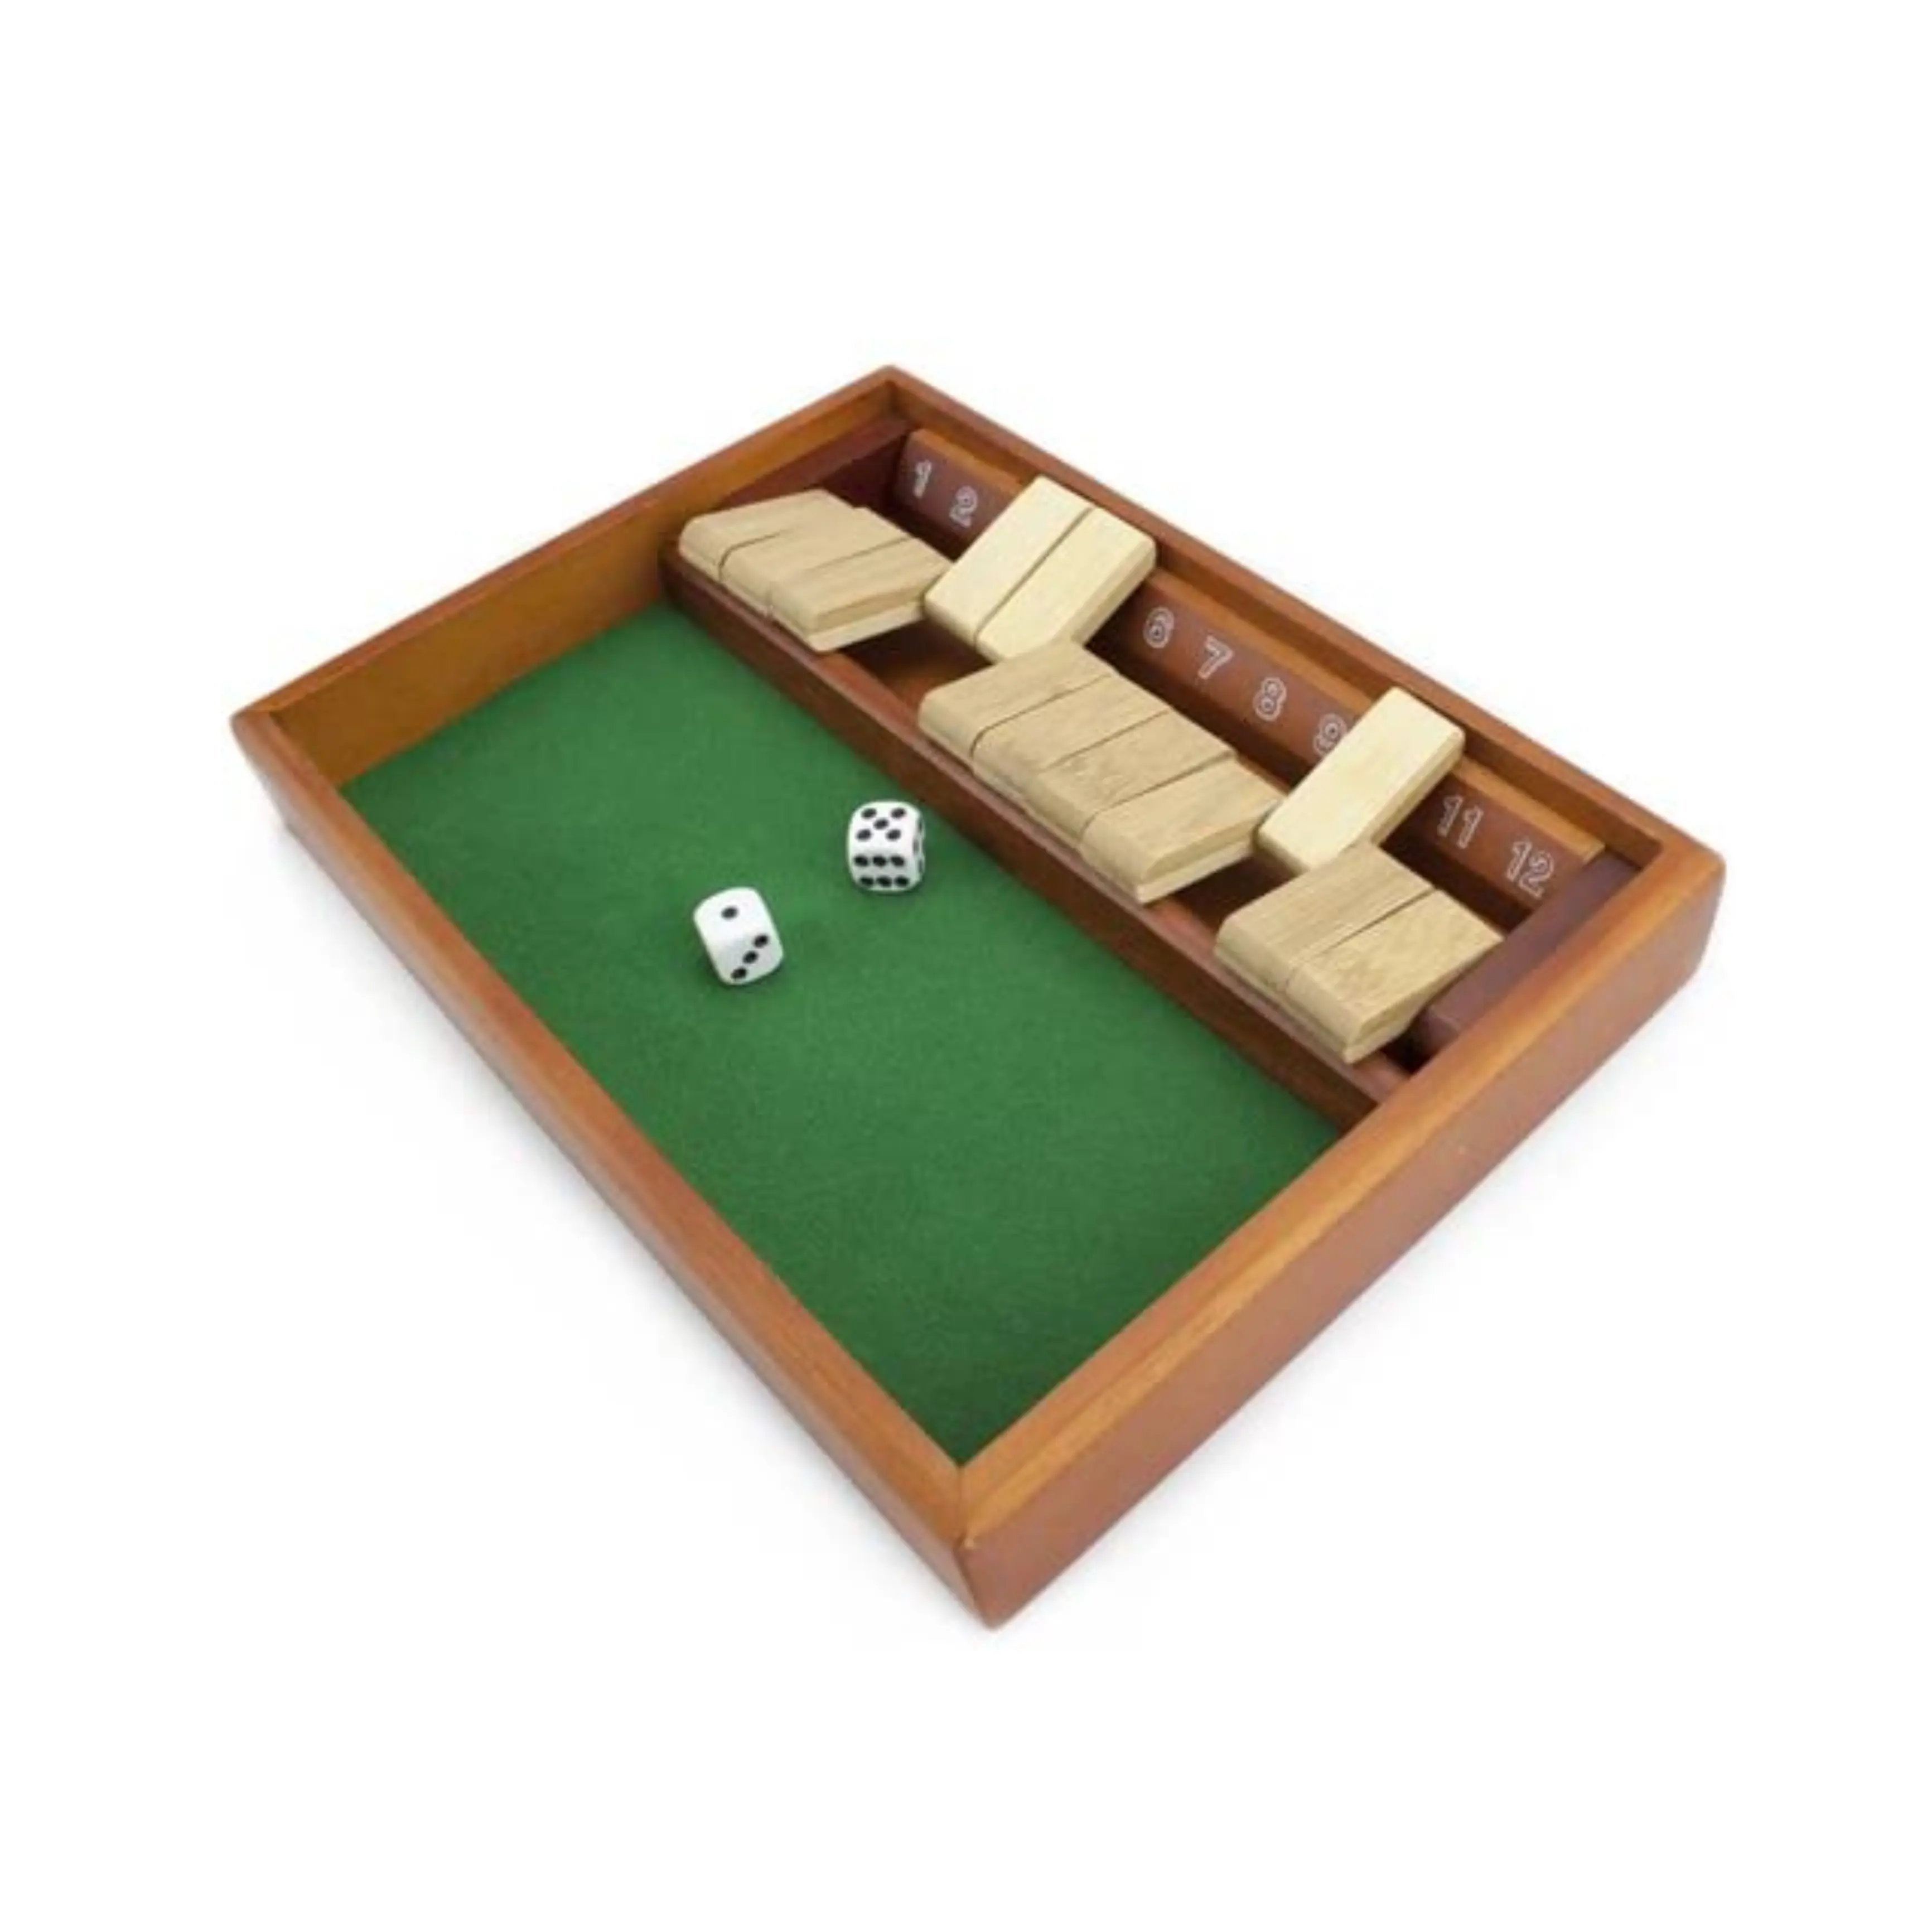 OEM Wooden 4 Players Shut The Box Dice Game Soft Dice Rolls Classic Tabletop Version of The Popular English Pub Game